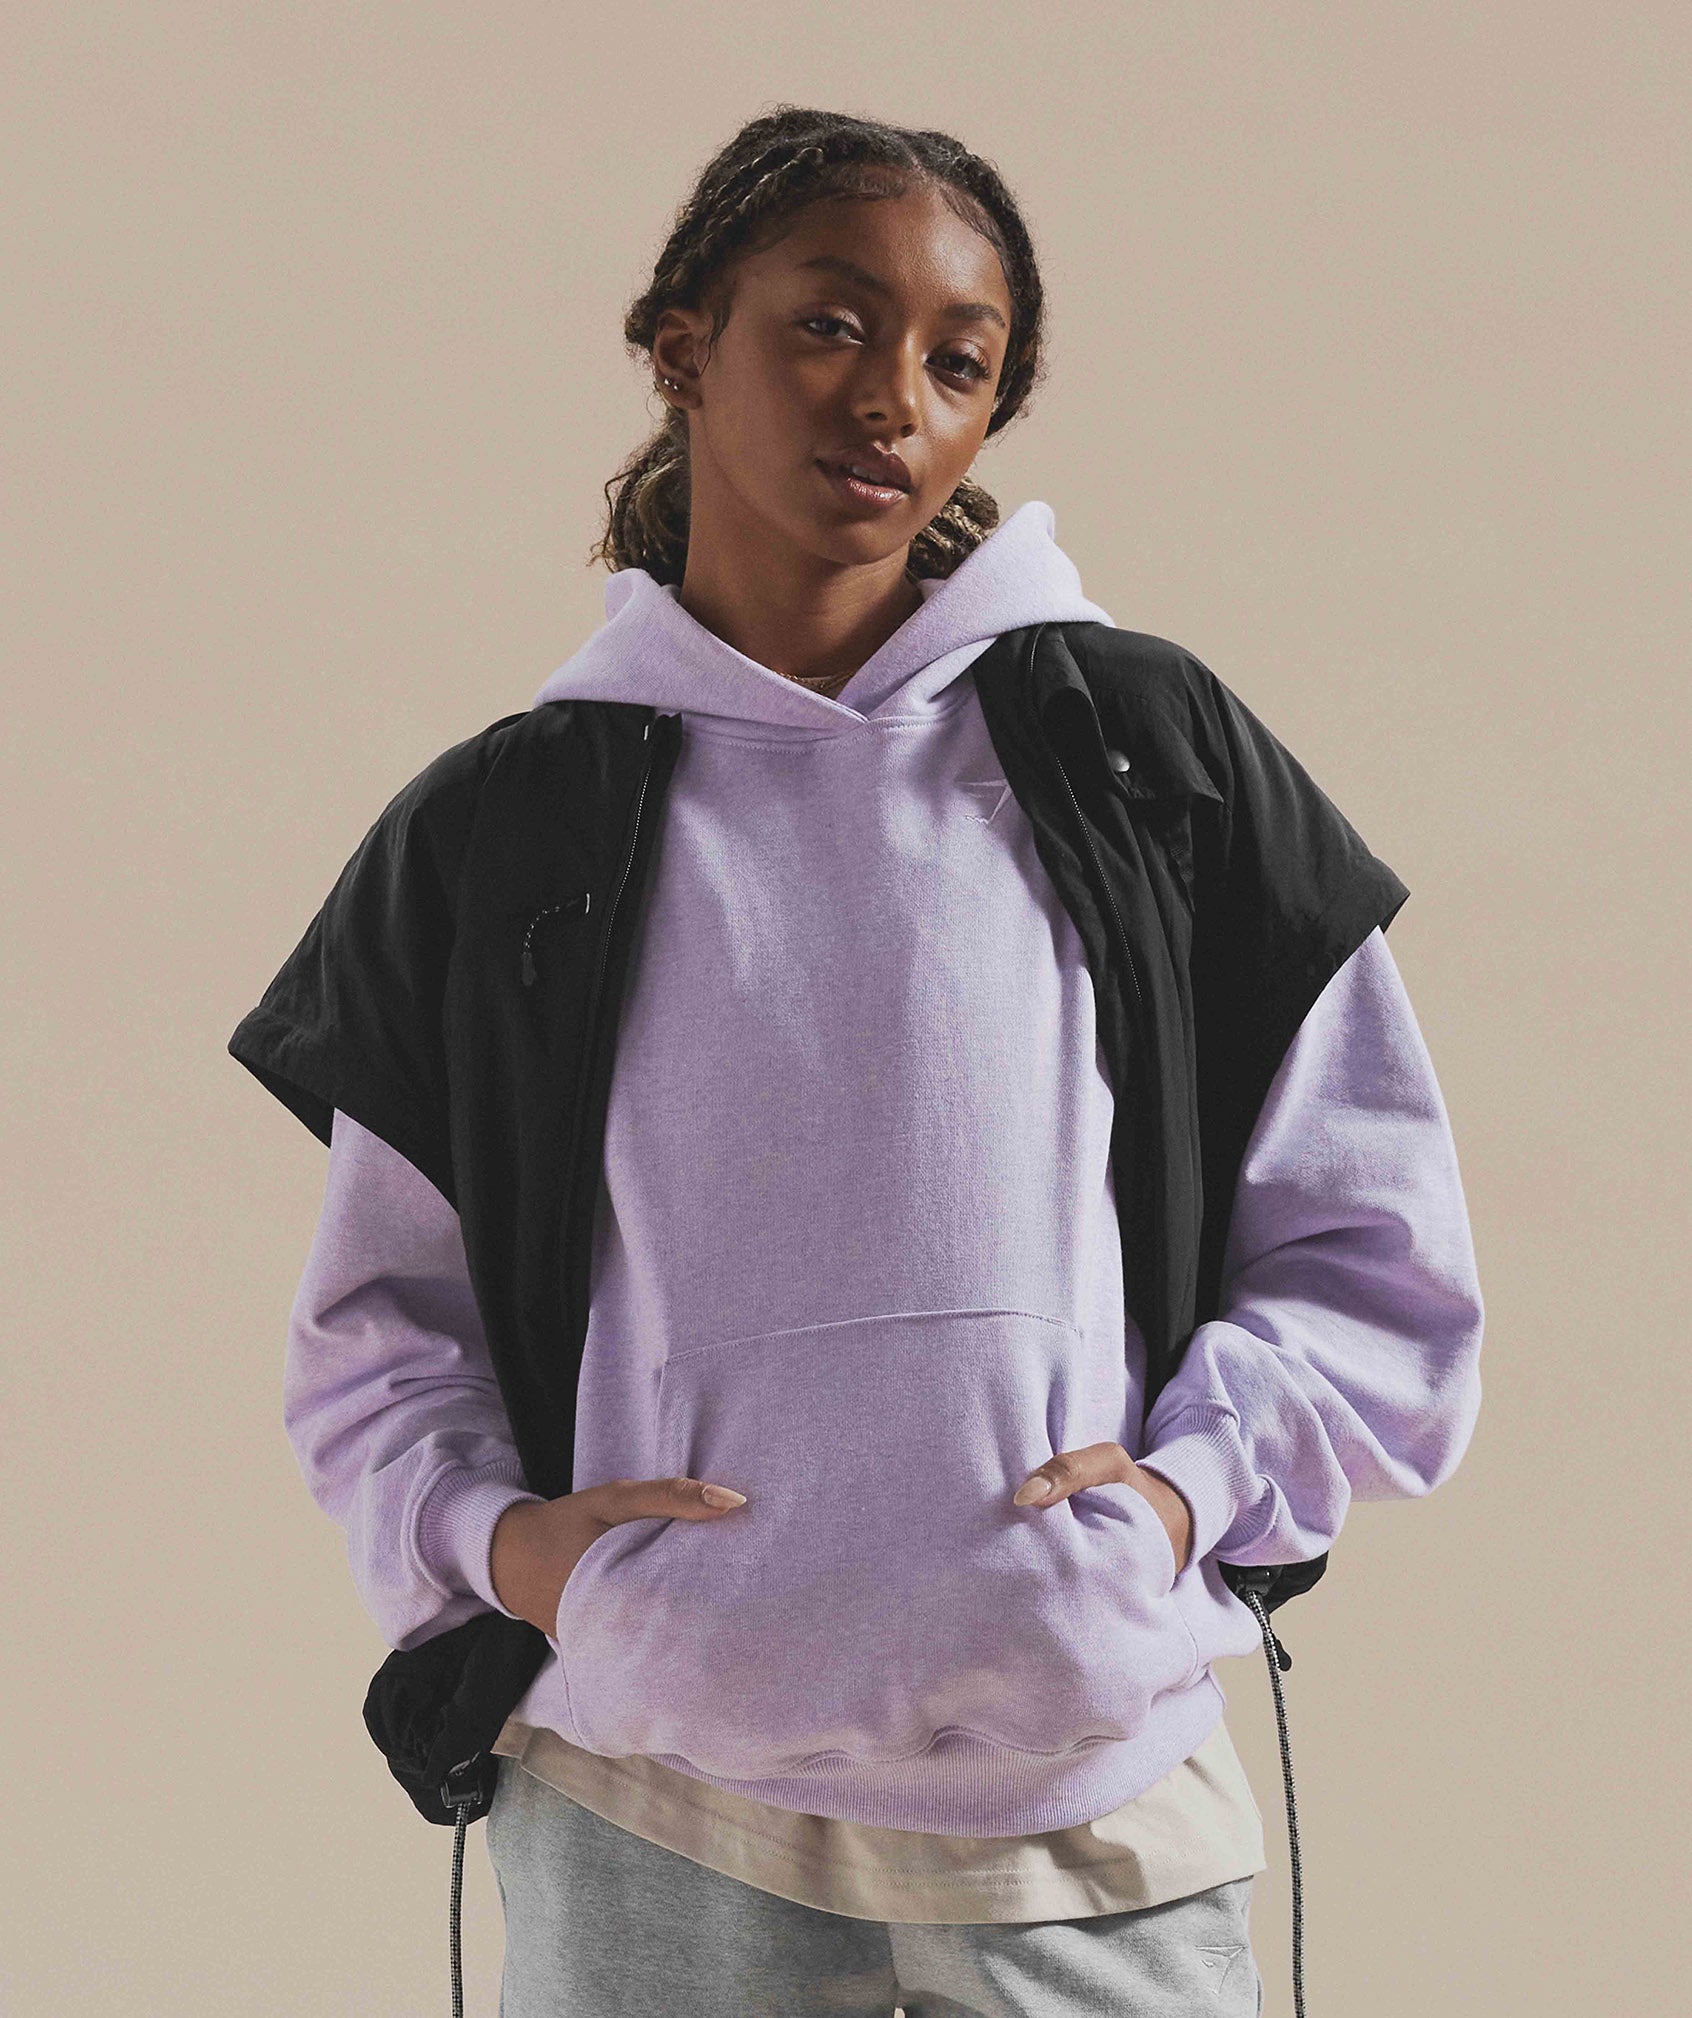 Rest Day Sweats Hoodie in Aura Lilac Marl